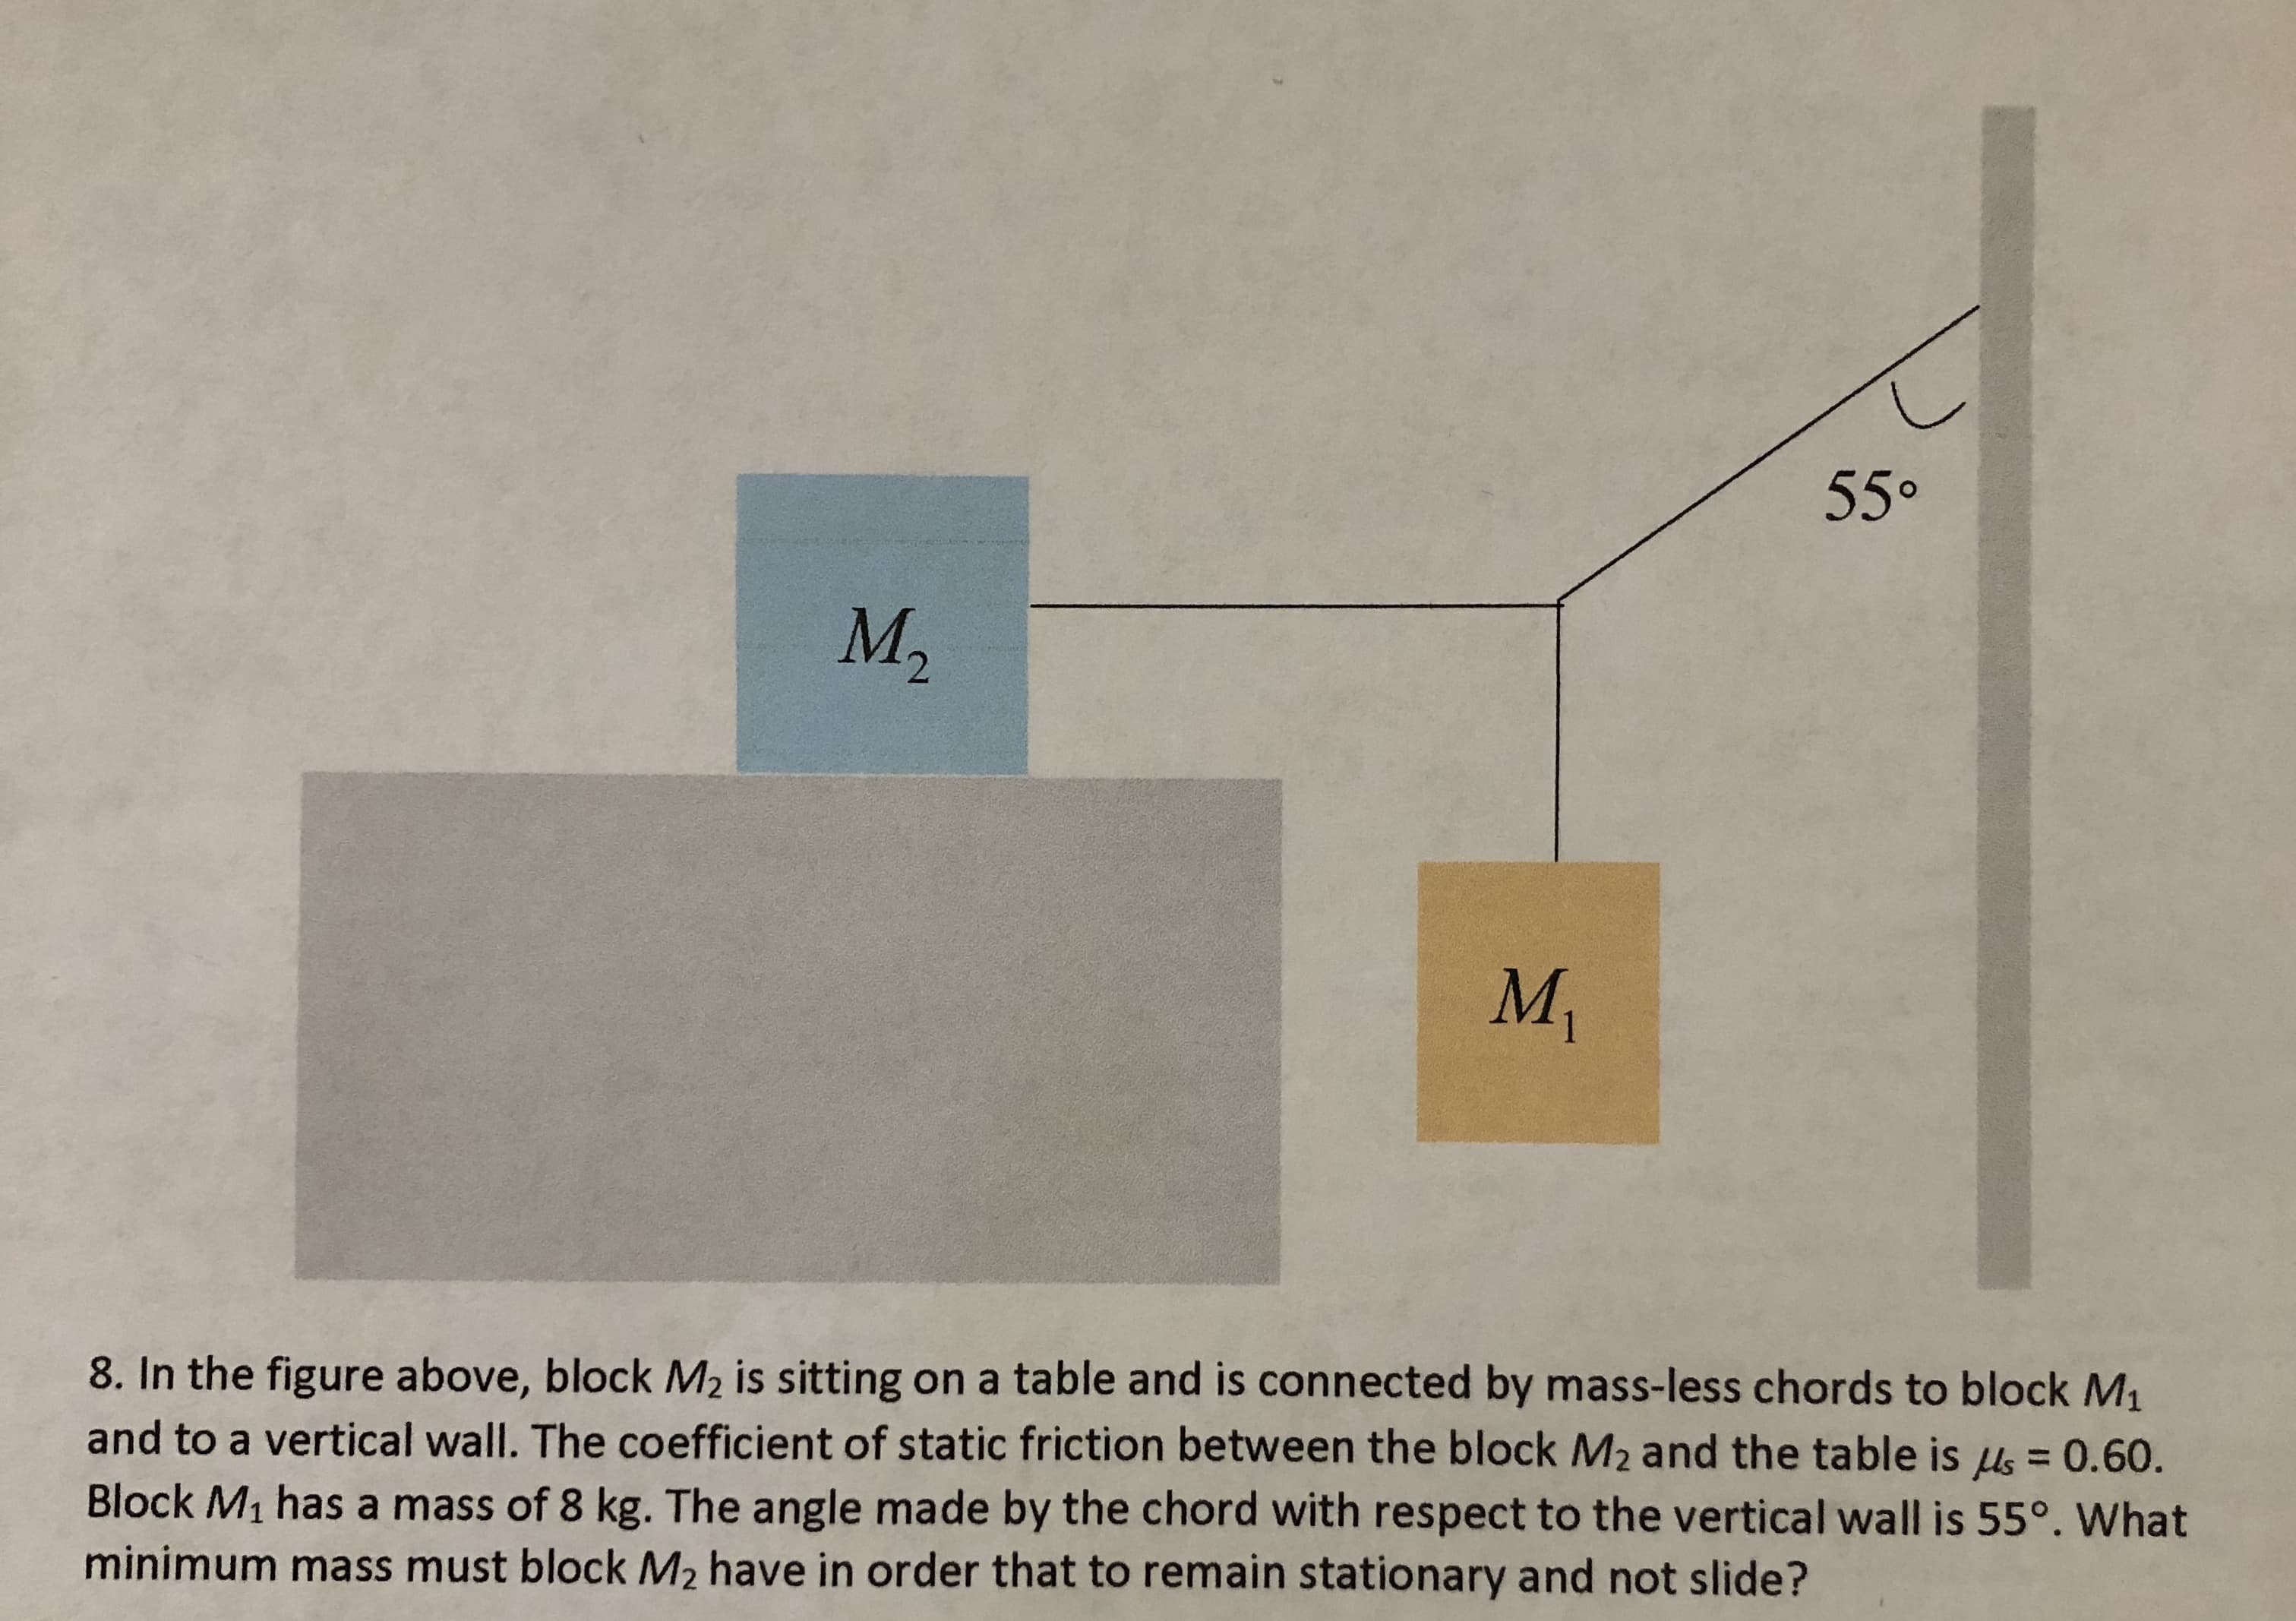 55°
M,
M1
8. In the figure above, block M2 is sitting on a table and is connected by mass-less chords to block M,
and to a vertical wall. The coefficient of static friction between the block M2 and the table is ls = 0.60.
Block M1 has a mass of 8 kg. The angle made by the chord with respect to the vertical wall is 55°. What
minimum mass must block M2 have in order that to remain stationary and not slide?
%3D
